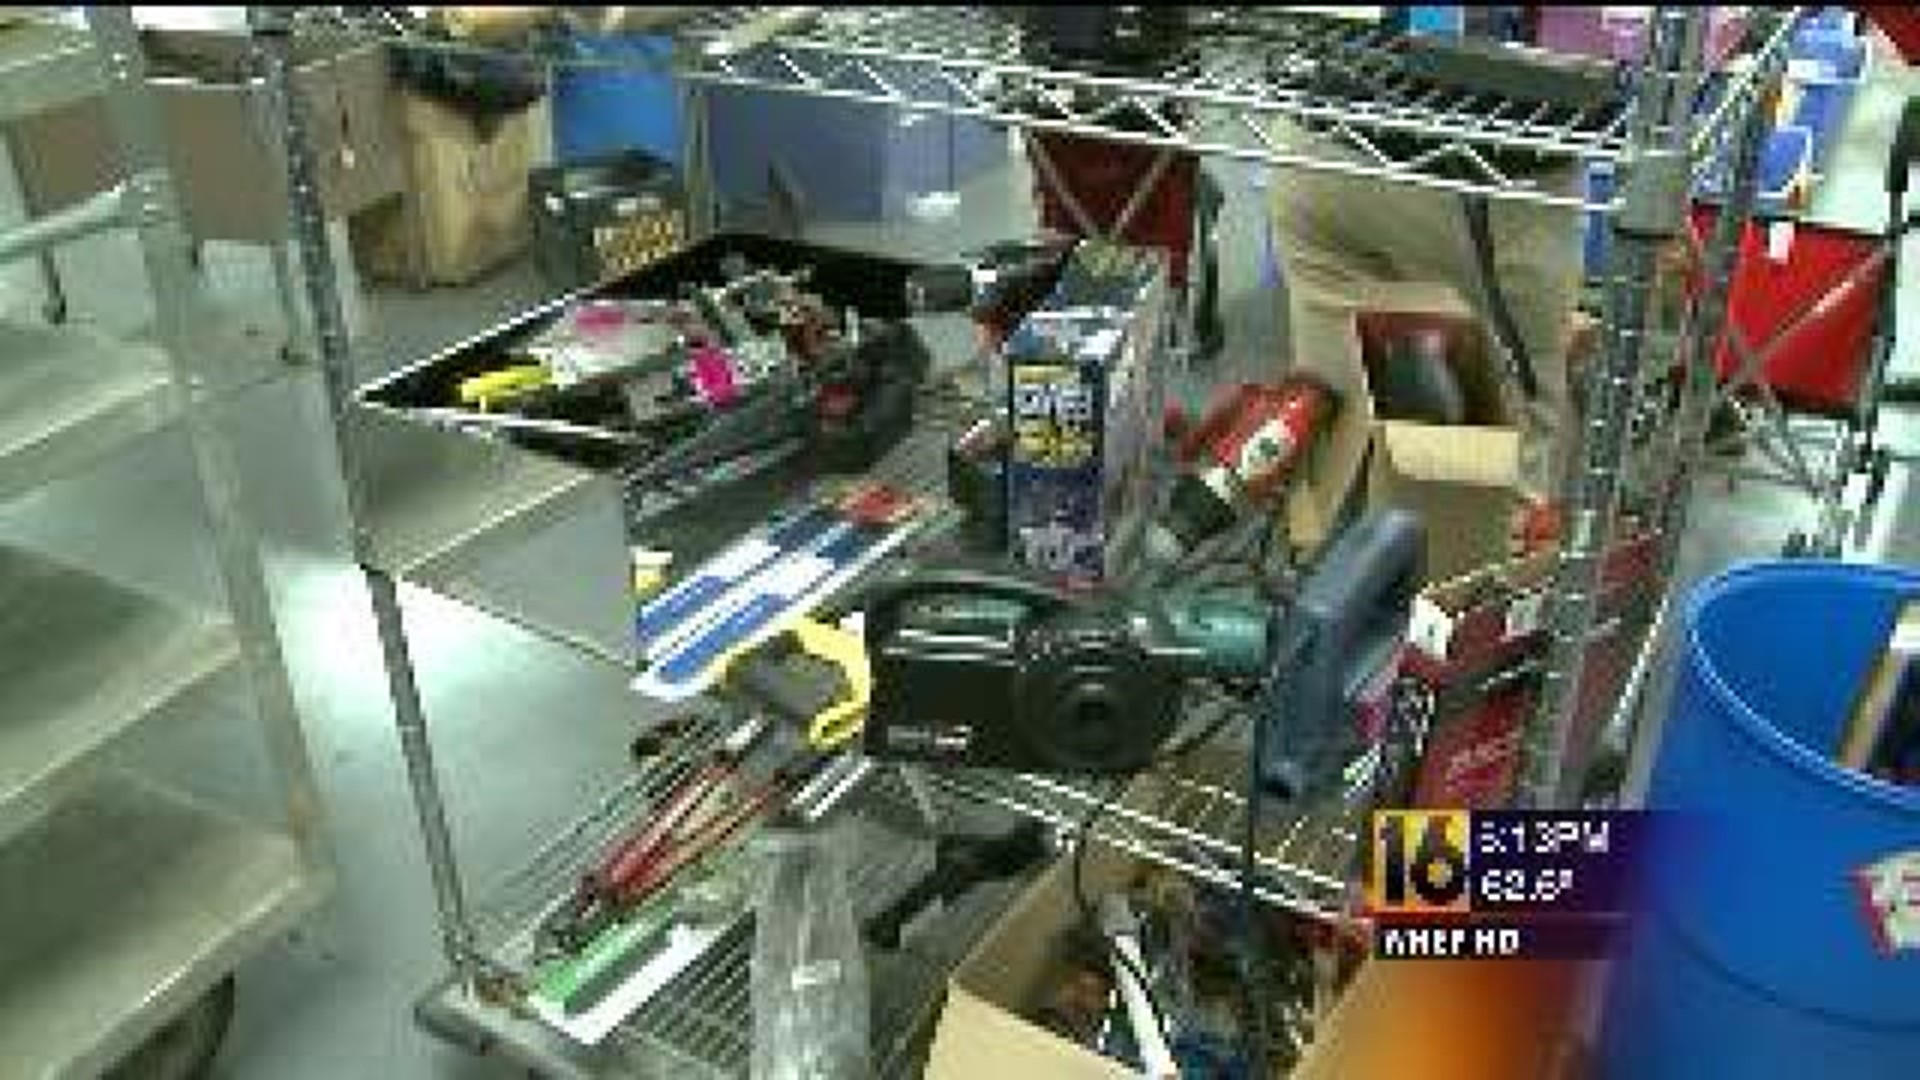 TSA Confiscated Items Sold in Harrisburg